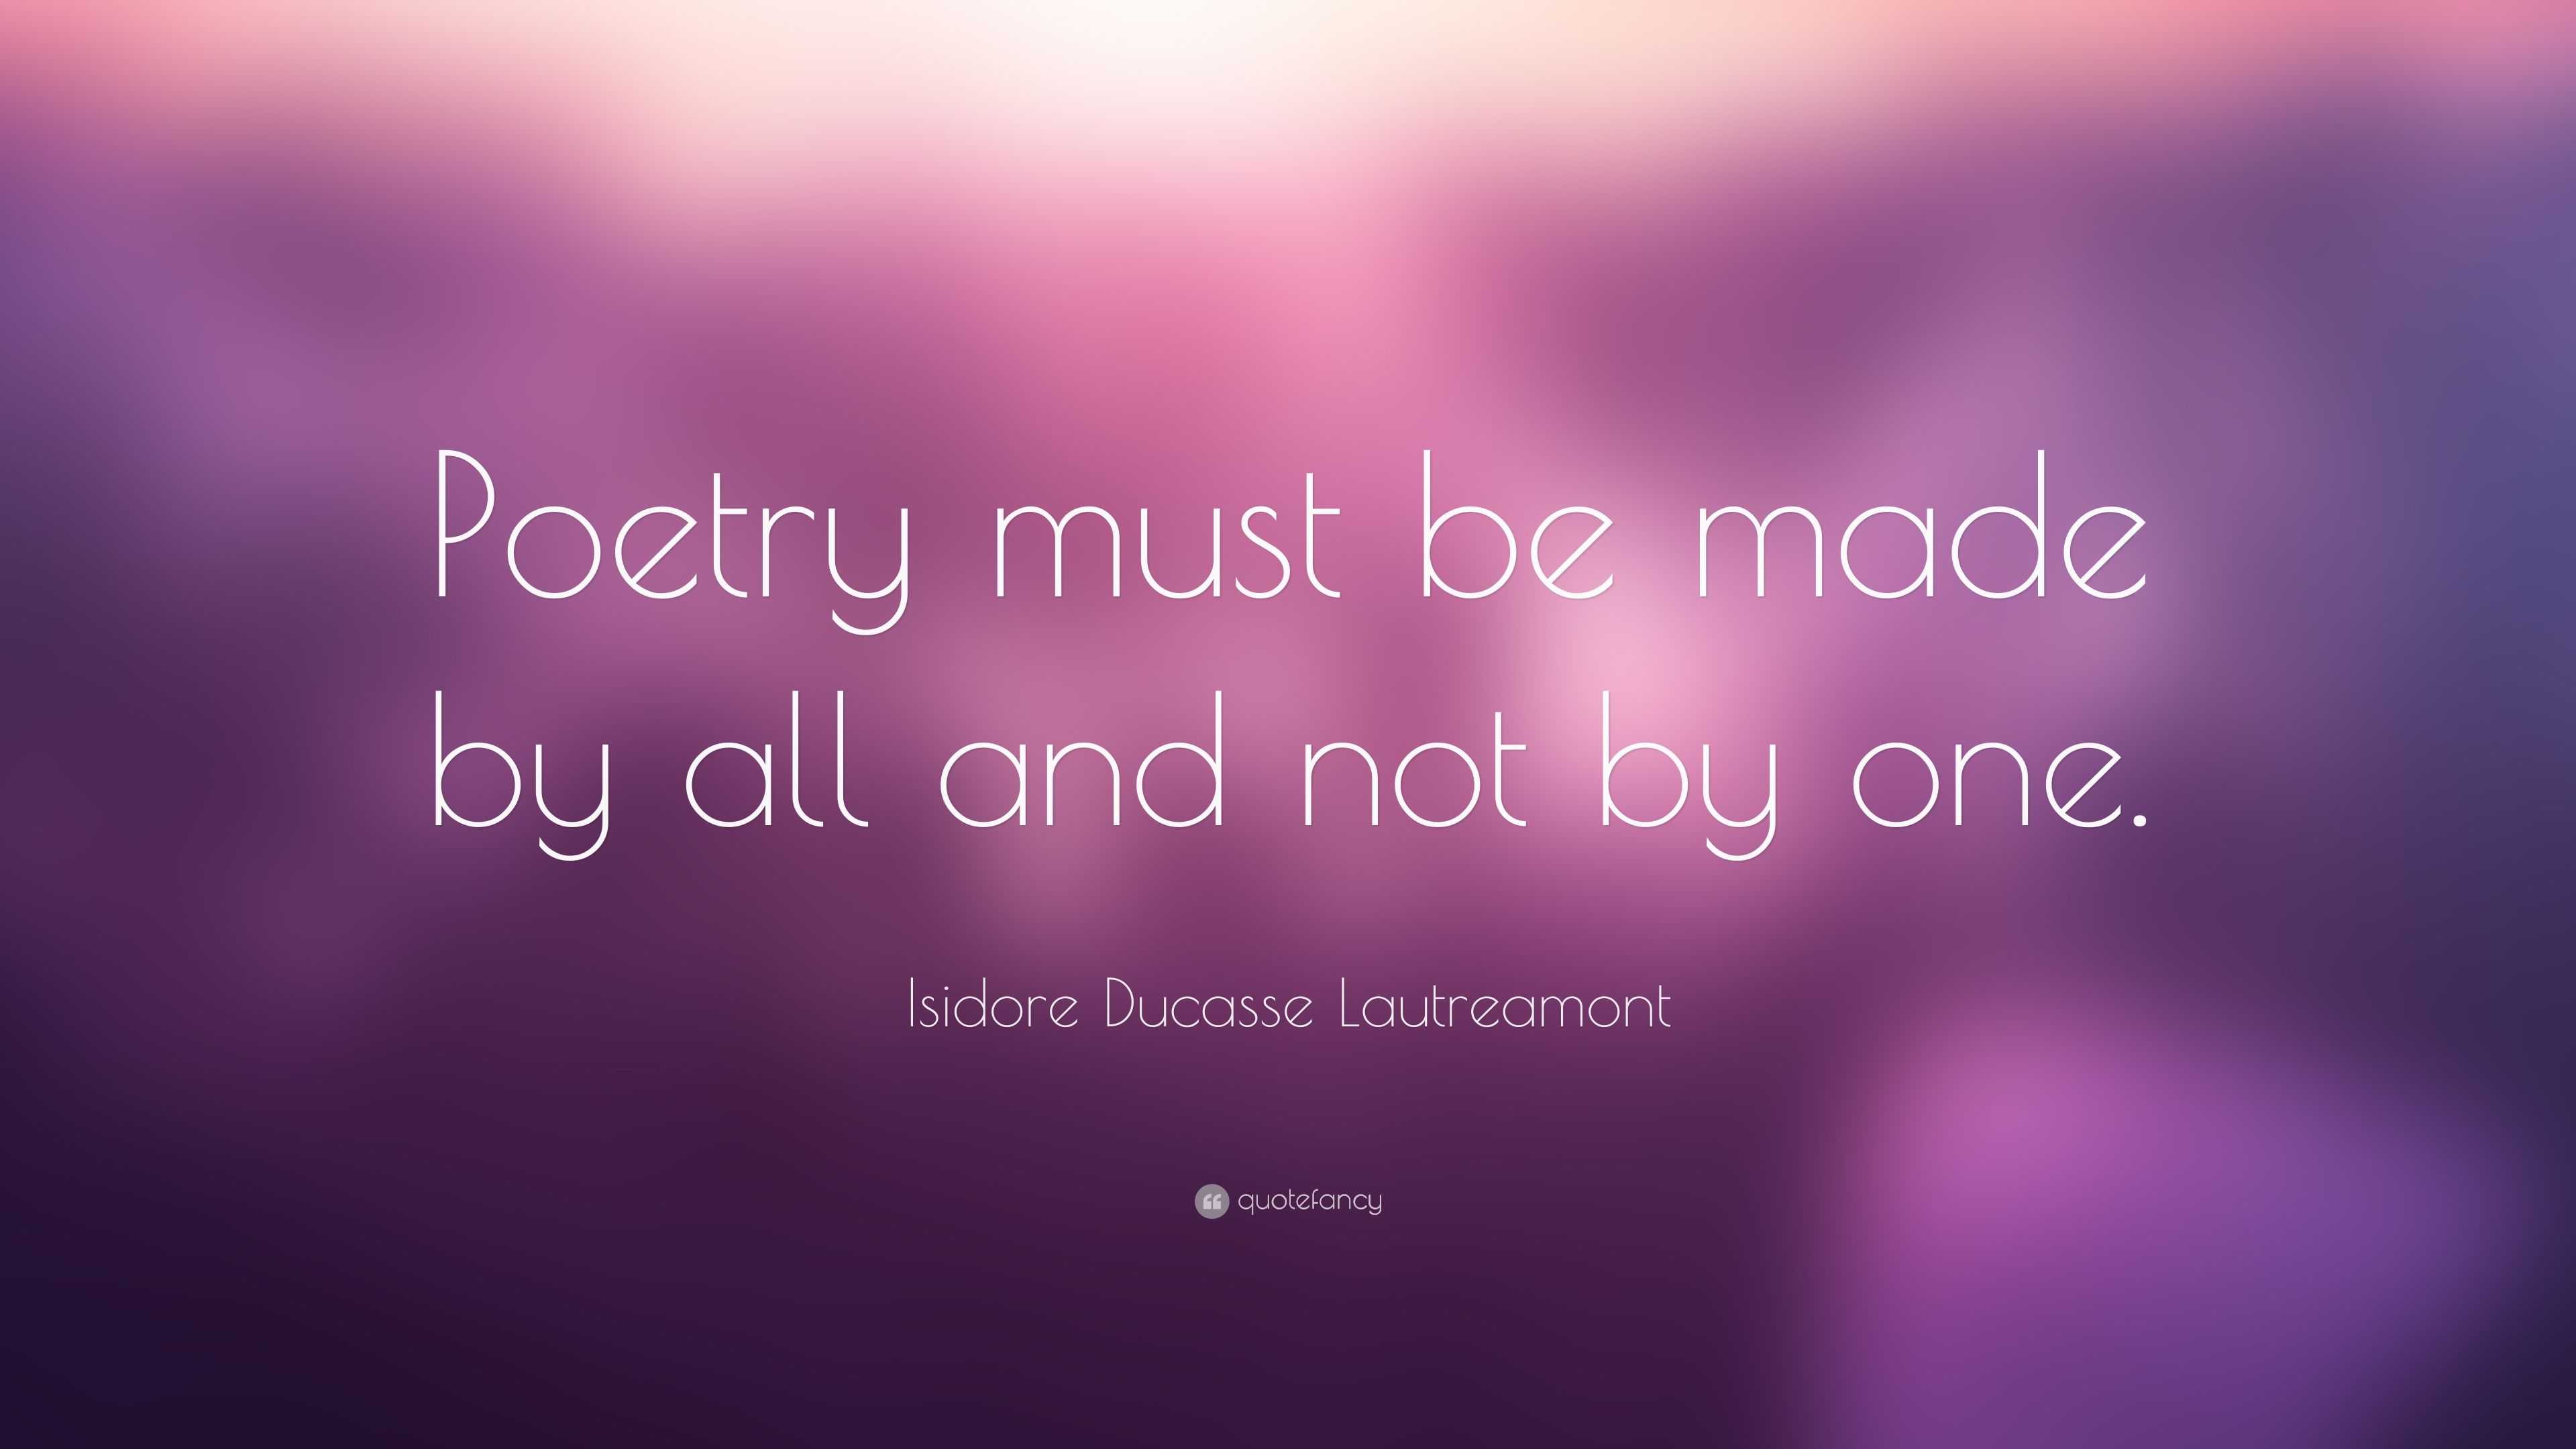 Isidore Ducasse Lautreamont Quote: “Poetry must be made by all and not ...